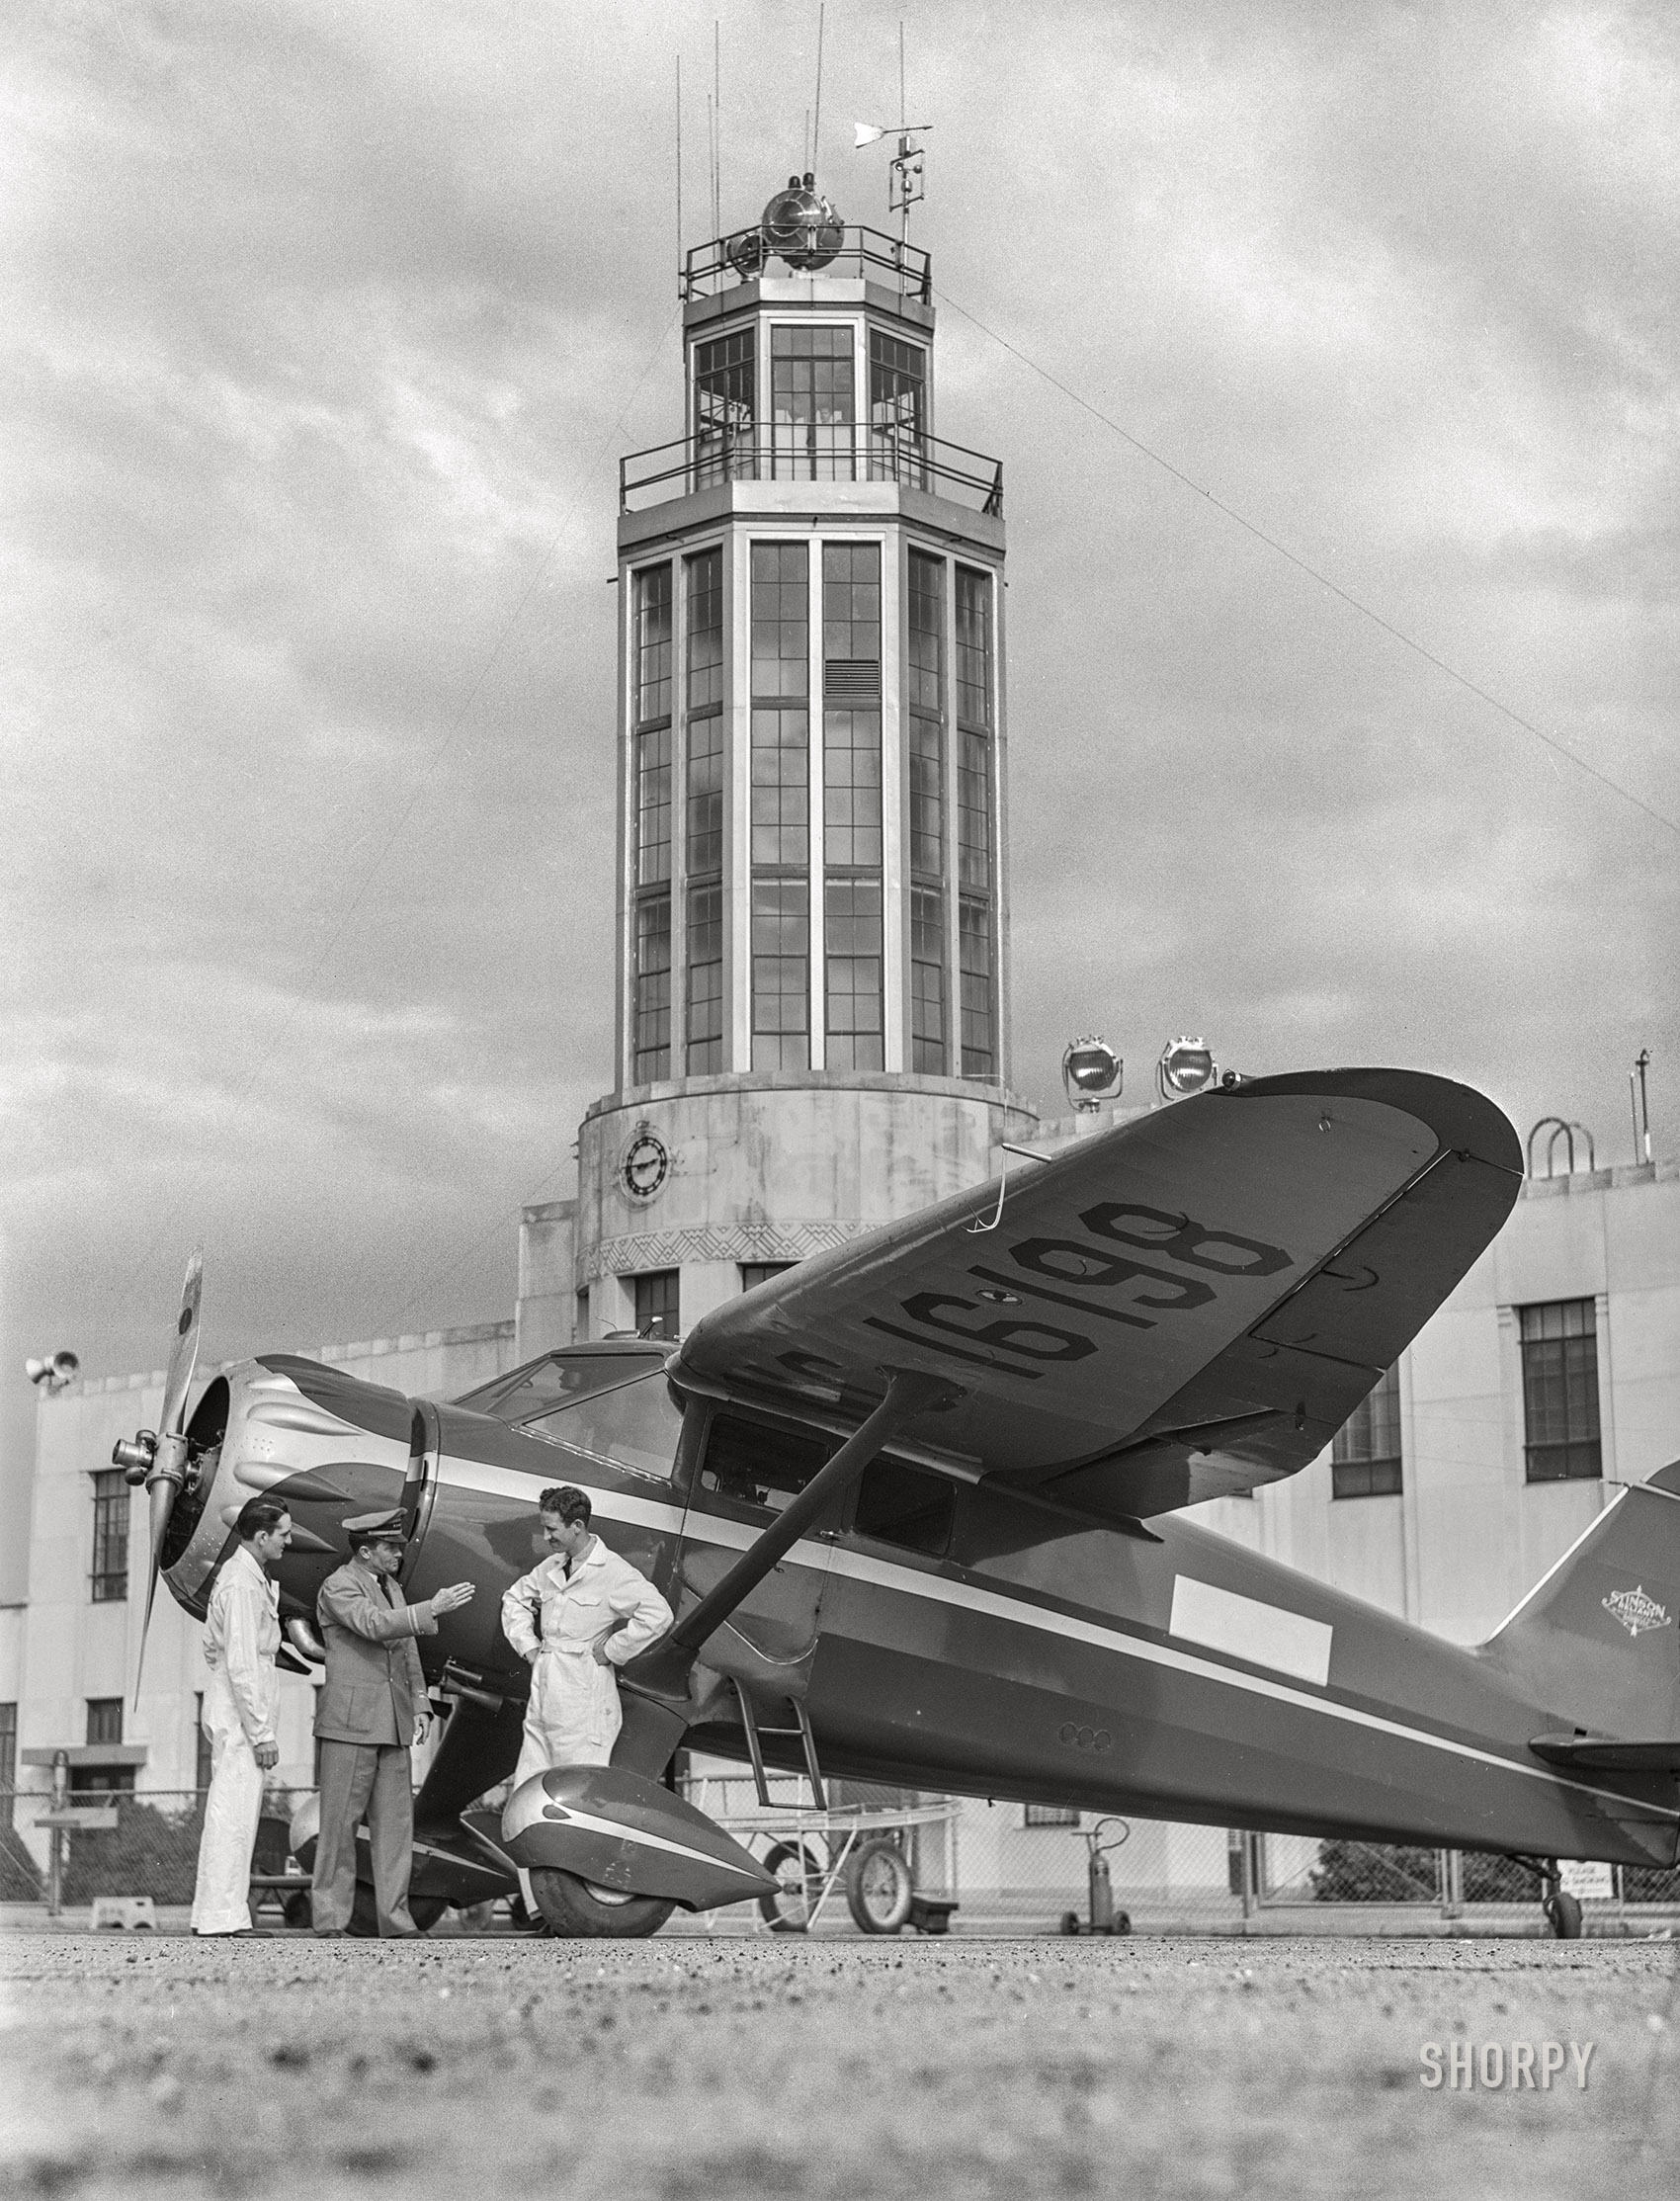 January 1942. Fort Worth, Texas. "Meacham Field. Civilian pilot training school. Instructor and students, control tower in background." Acetate negative by Arthur Rothstein. View full size.